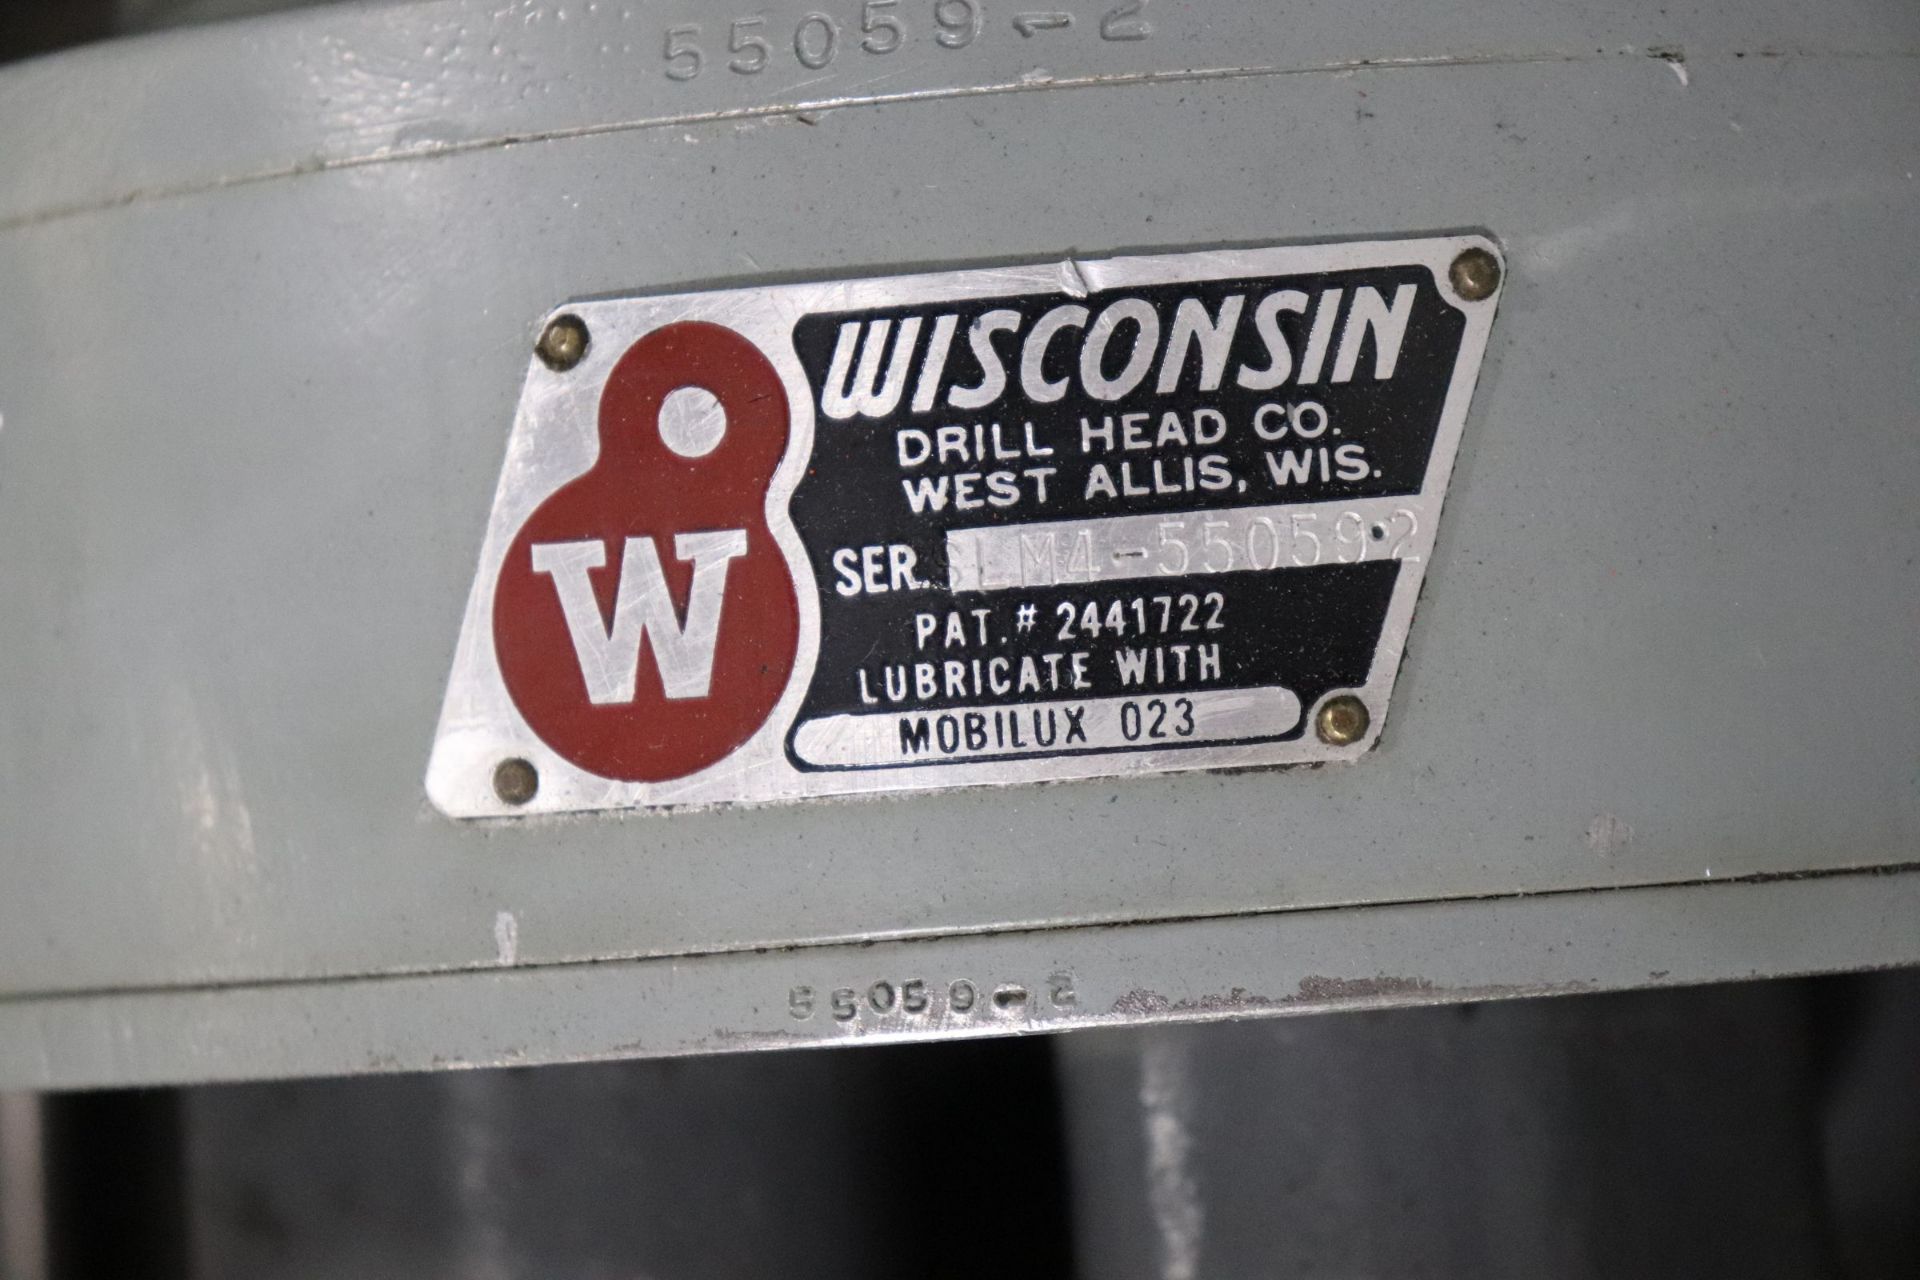 Wisconsin 4 Multi-Spindle Drill Head Attachment - Image 9 of 9